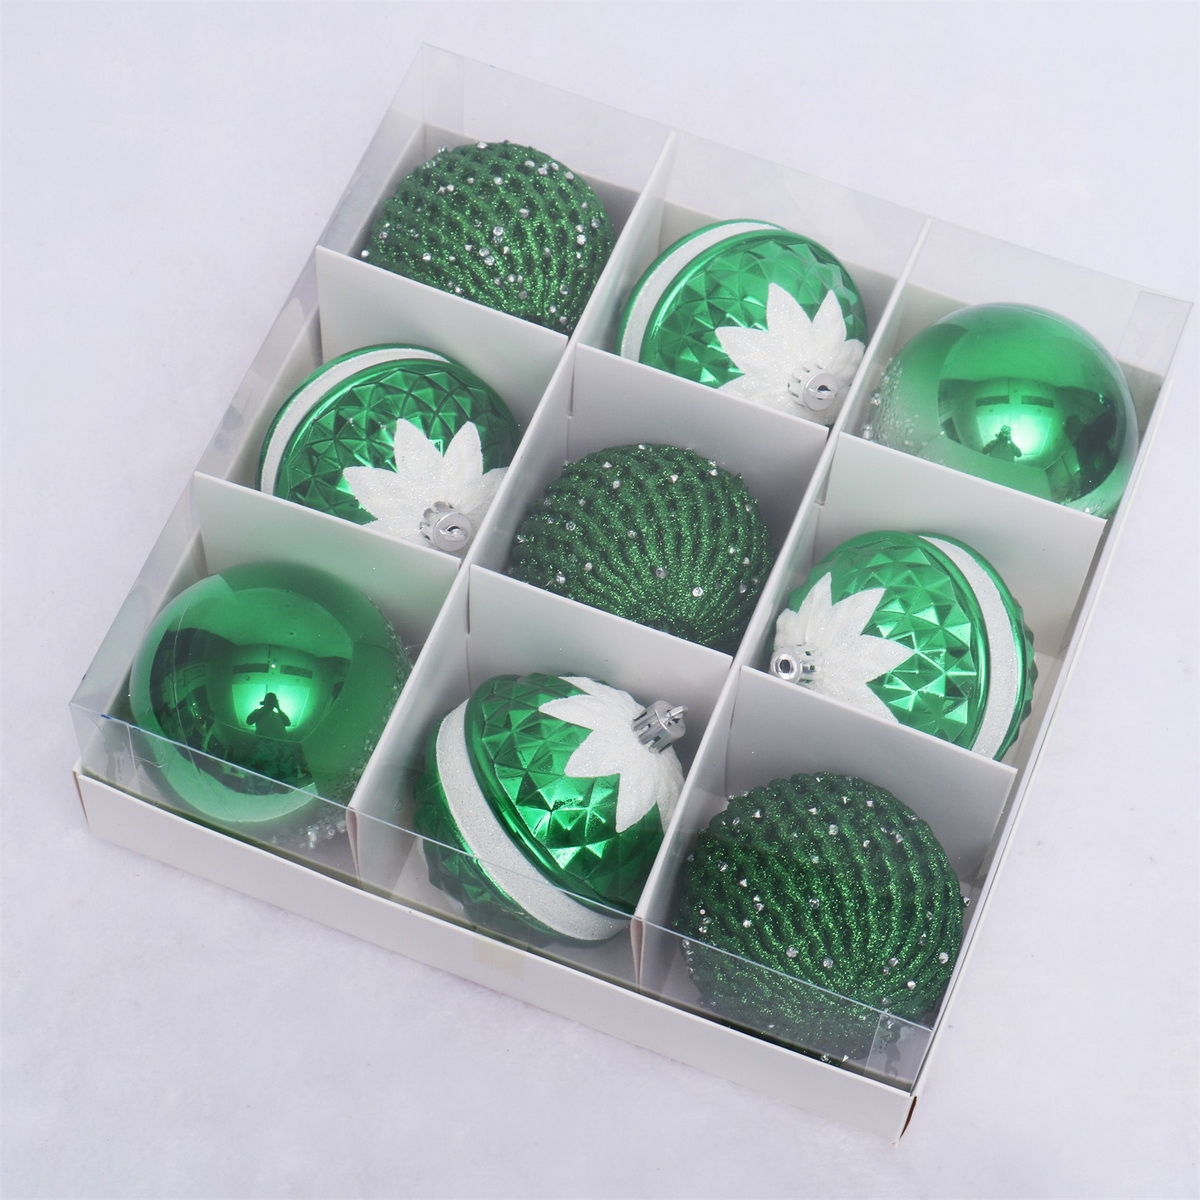 S/9 6Cm Green/White Shiny/Glitter Ball With Painting In Paper Box-GOON- Home Decoration, Christmas Decoration, Halloween Decor, Harvest Decor, Easter Decor, Thanksgiving Day Decor, Party Decor